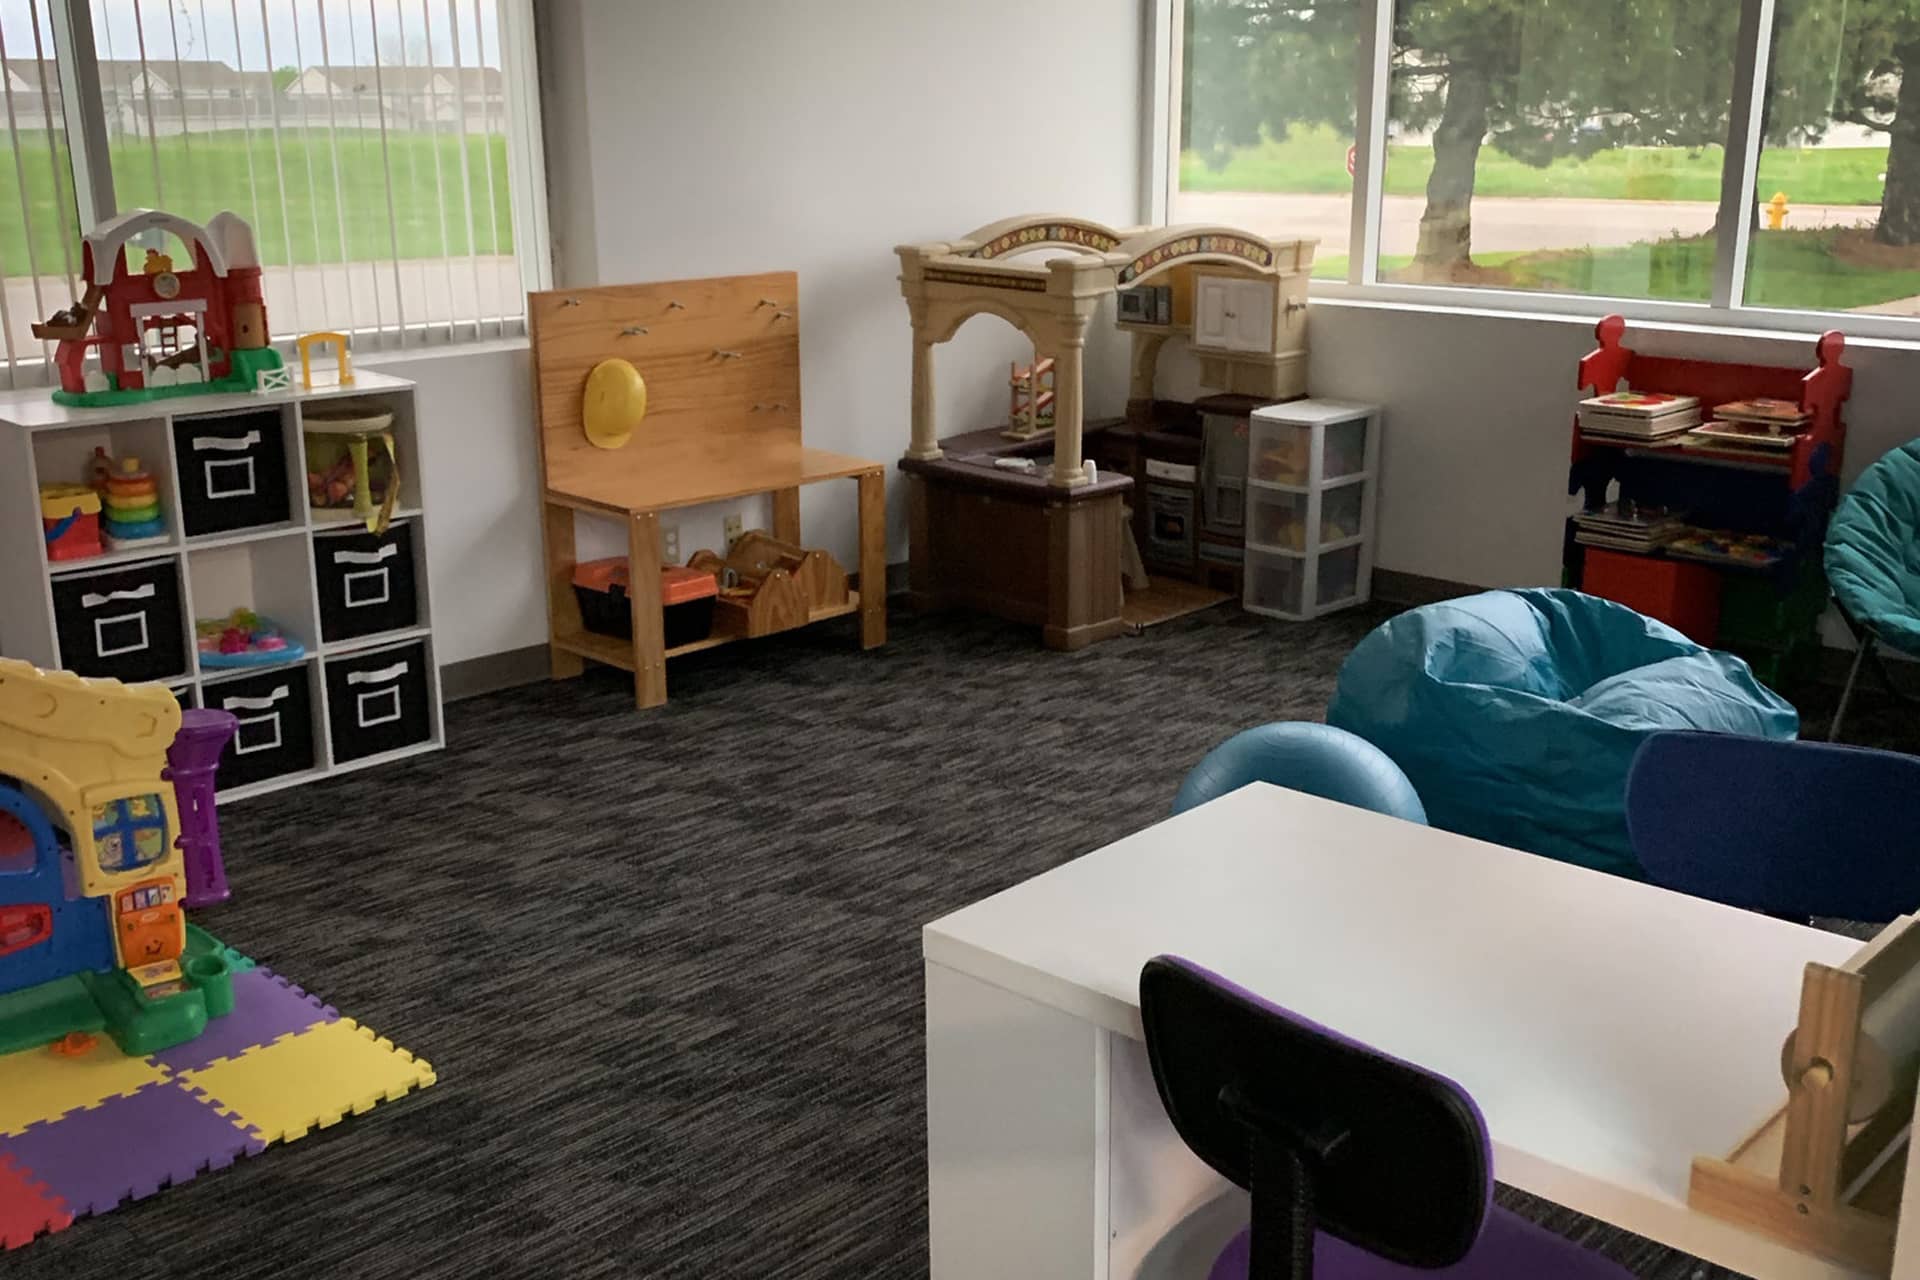 The play room at the Superhero Center for Autism